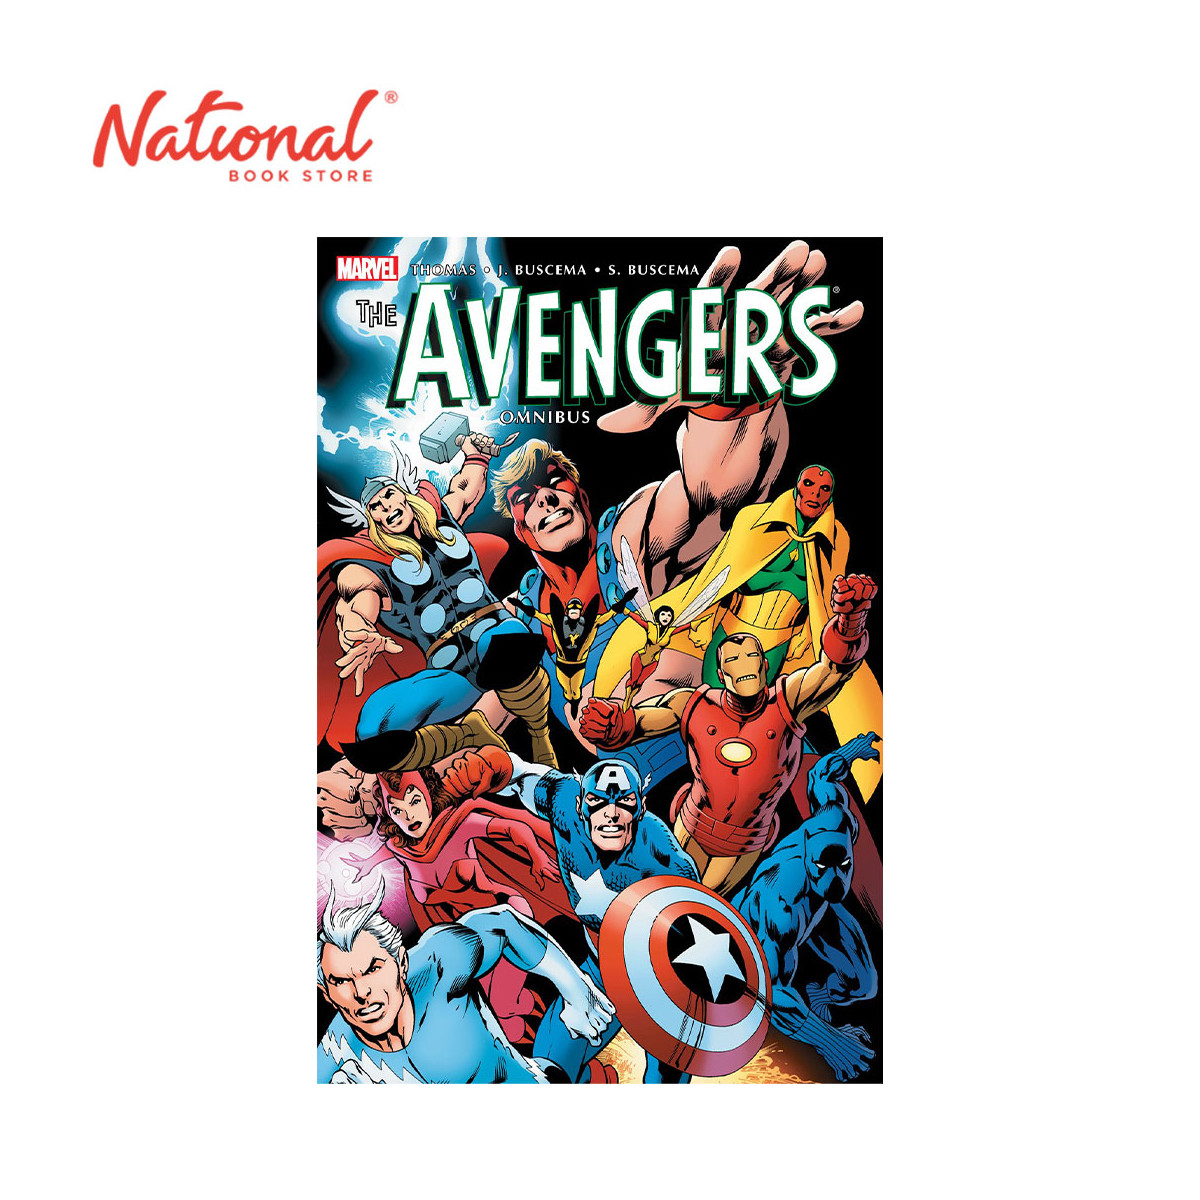 The Avengers Omnibus Volume 3 by Roy Thomas - Hardcover - Graphic Novels - Comics